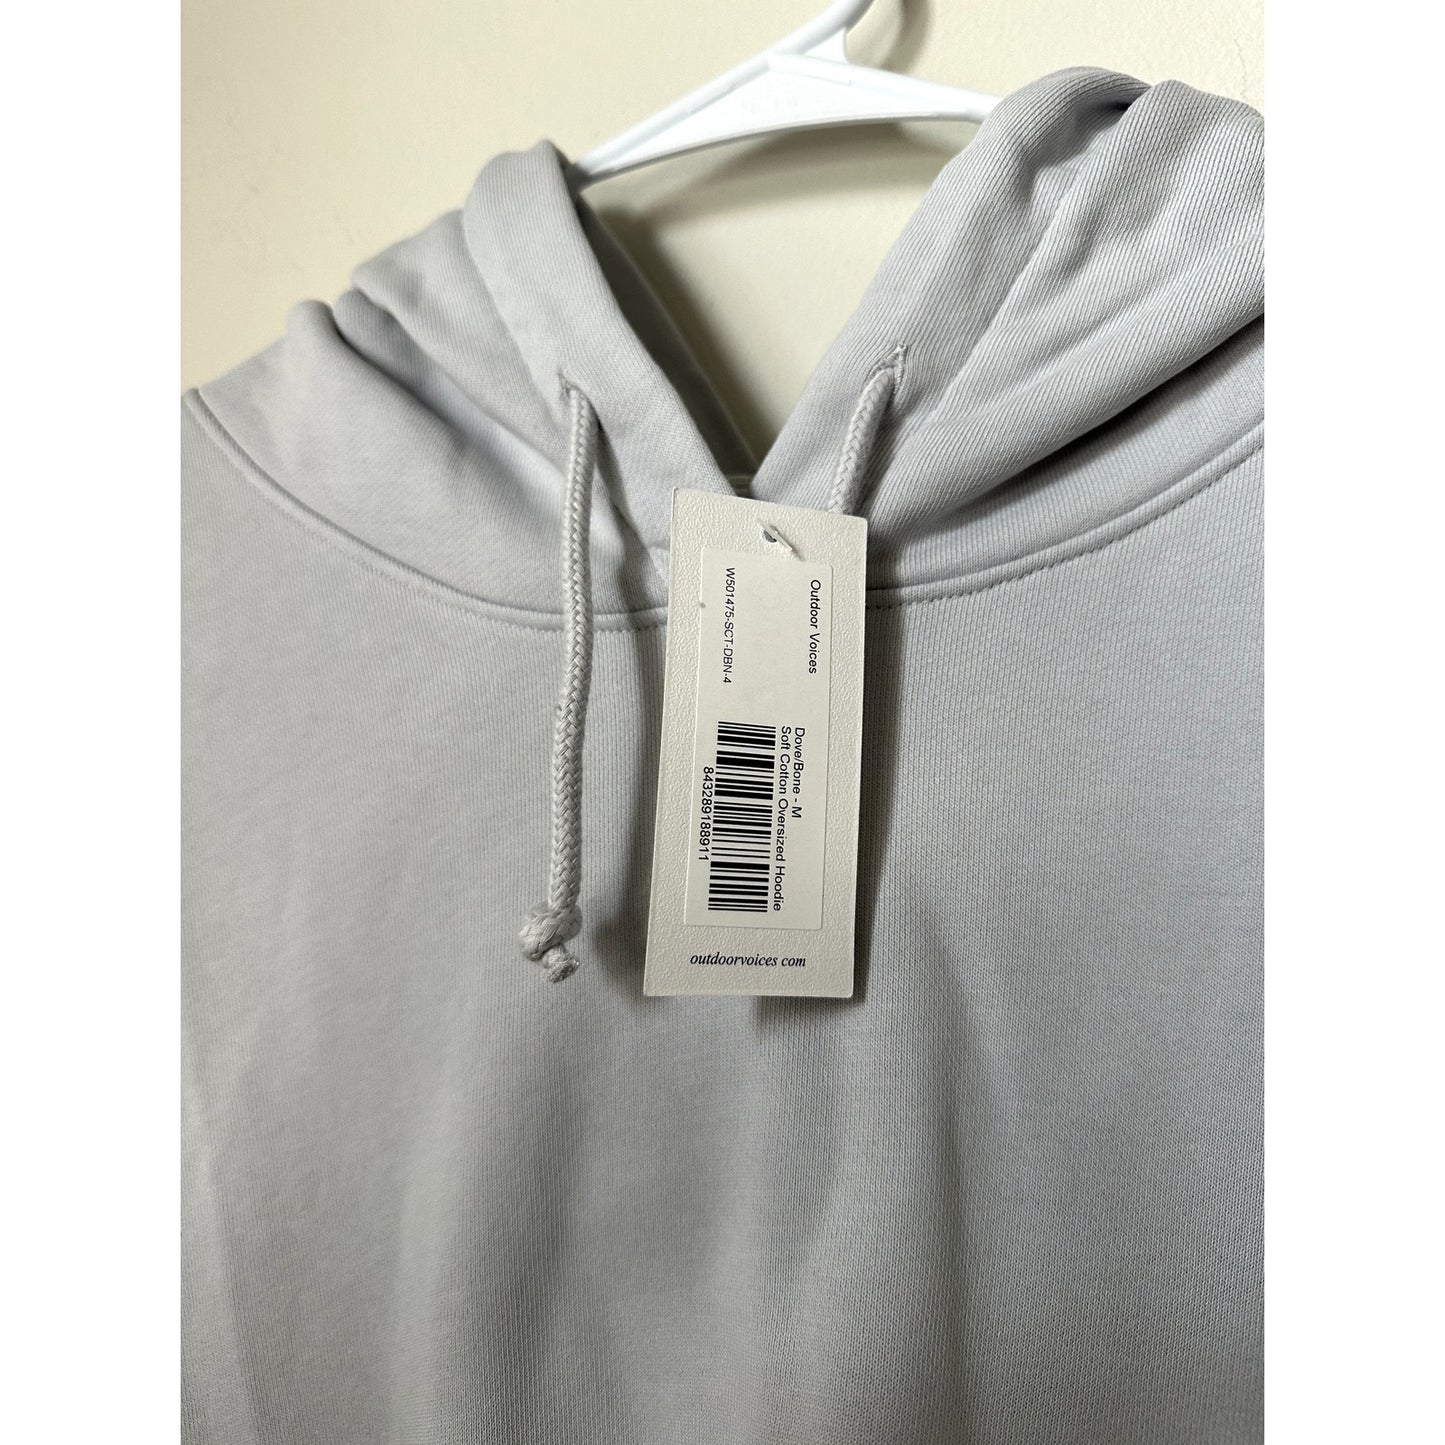 NWT Outdoor Voices Soft Cotton Oversized Hoodie, Size M